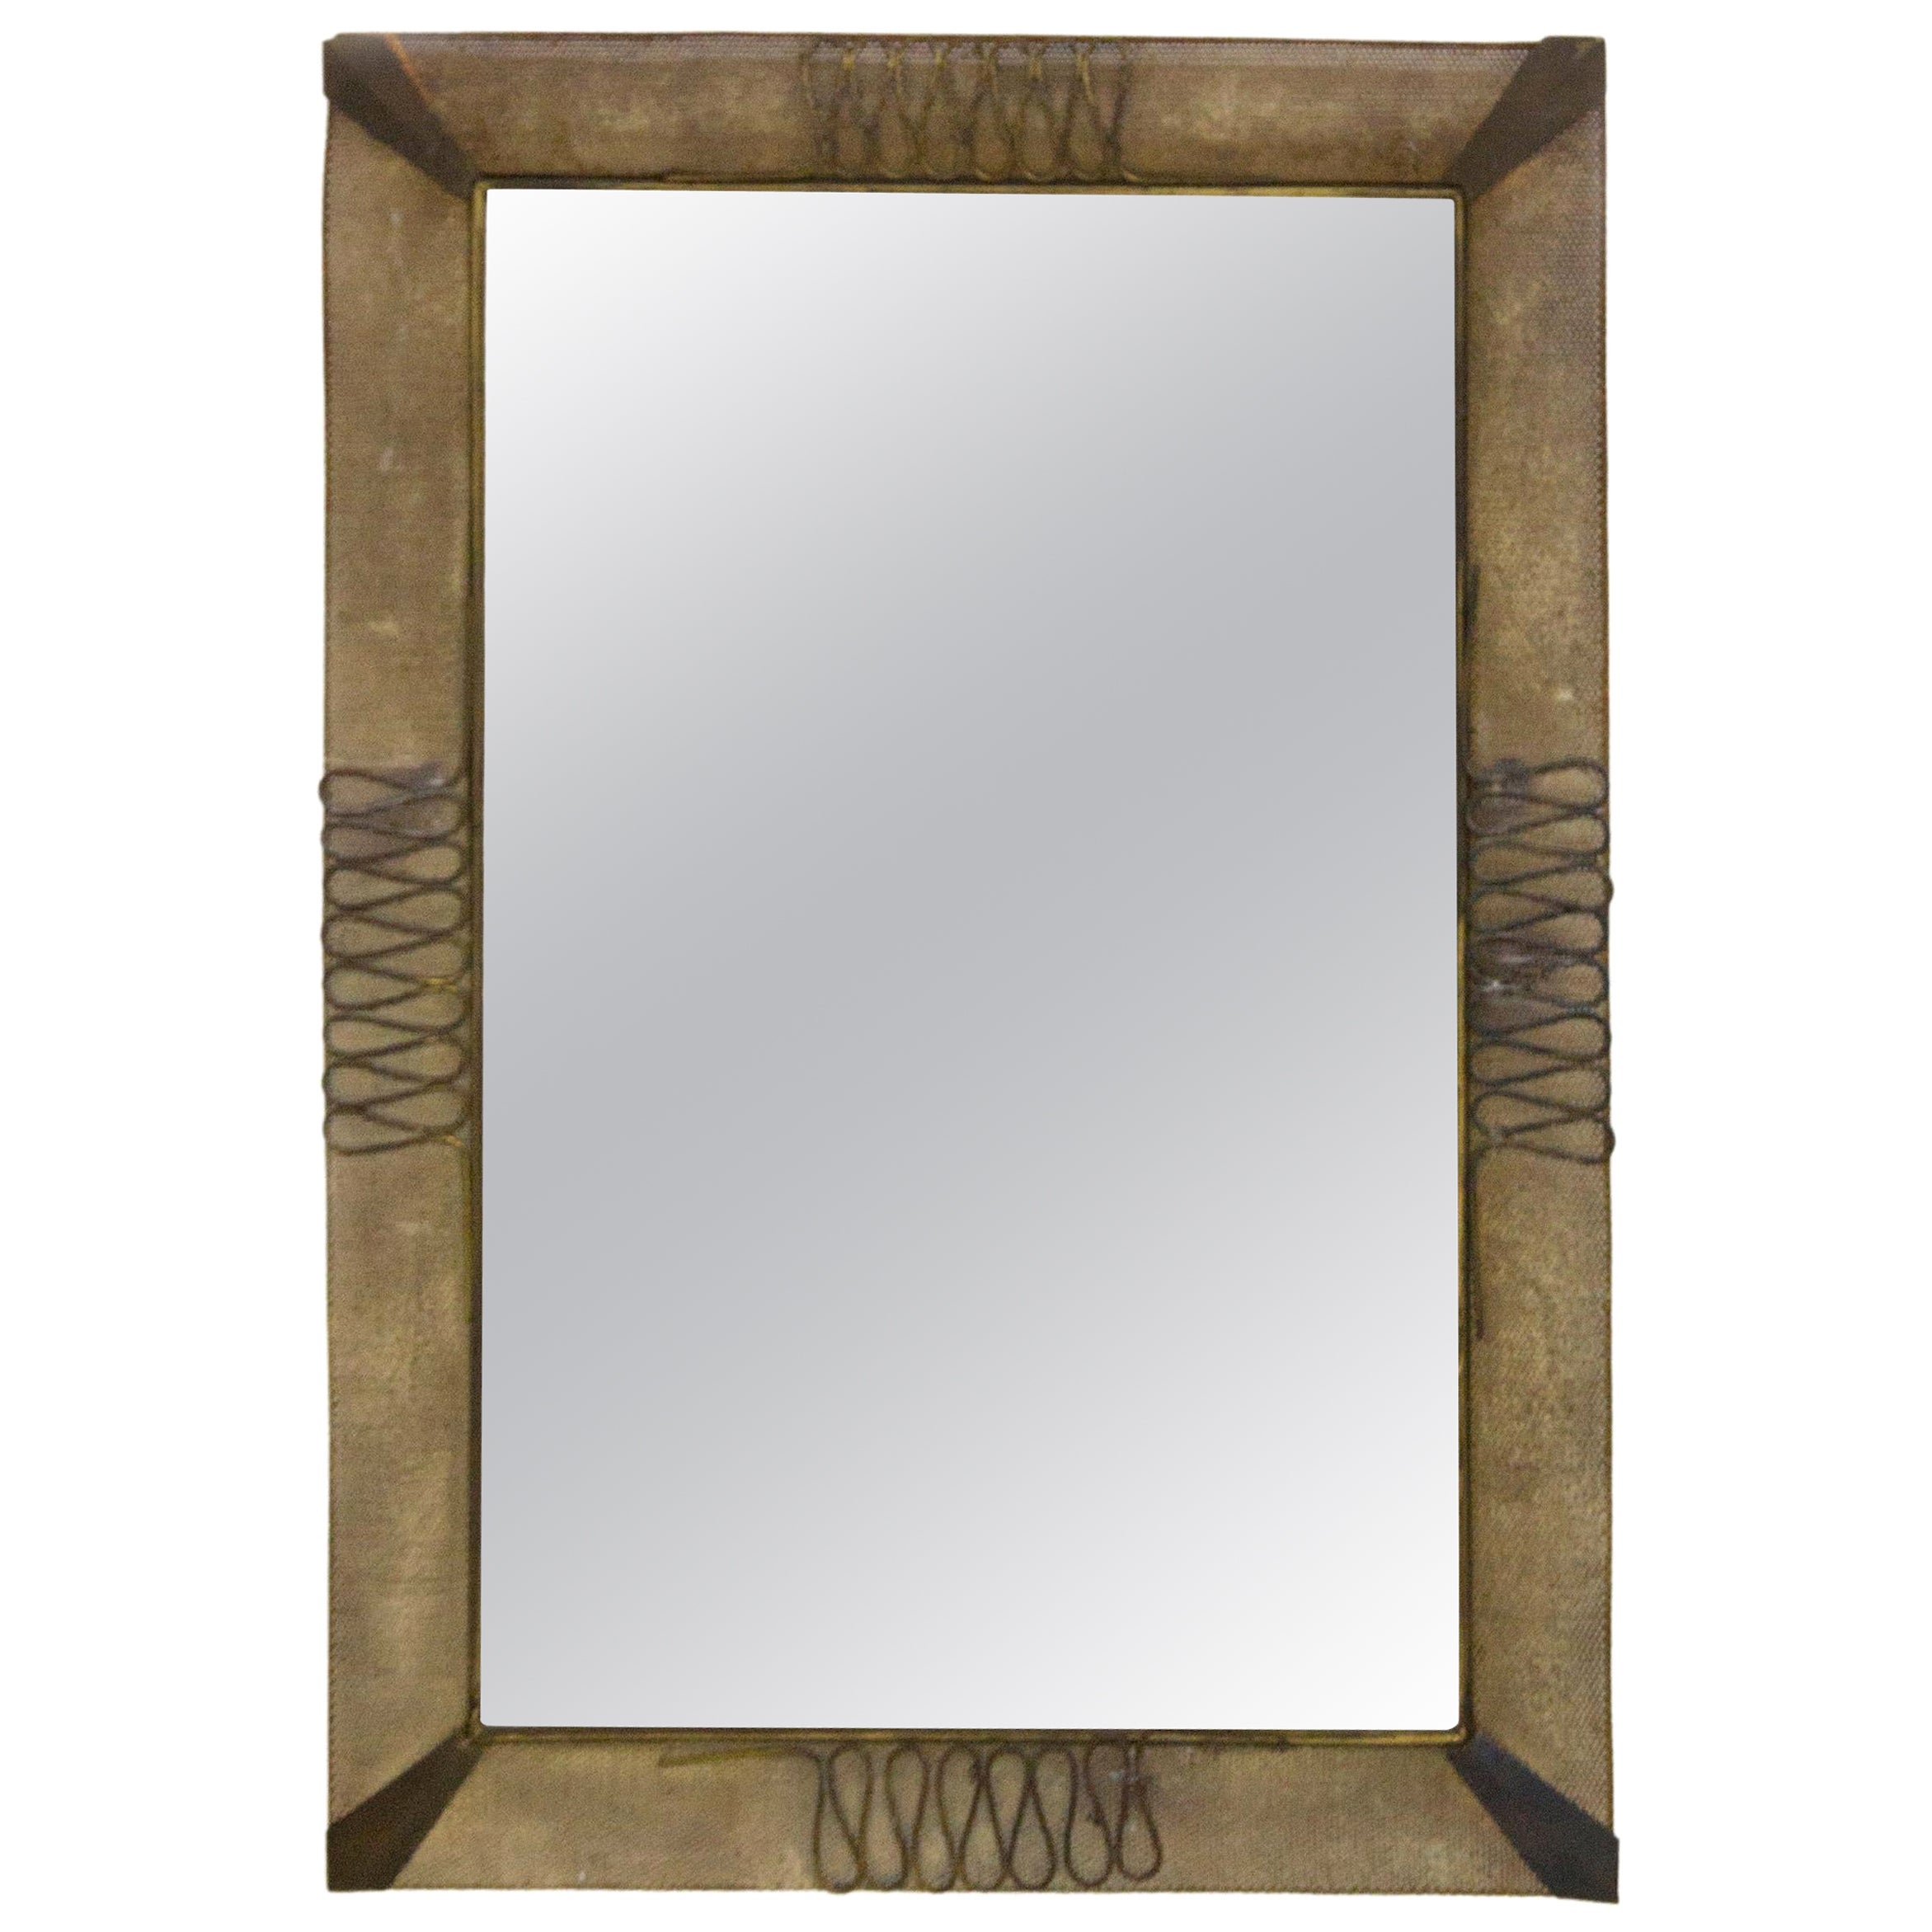 Paolo Buffa Vintage Mirror in Bronze and Iron Netting